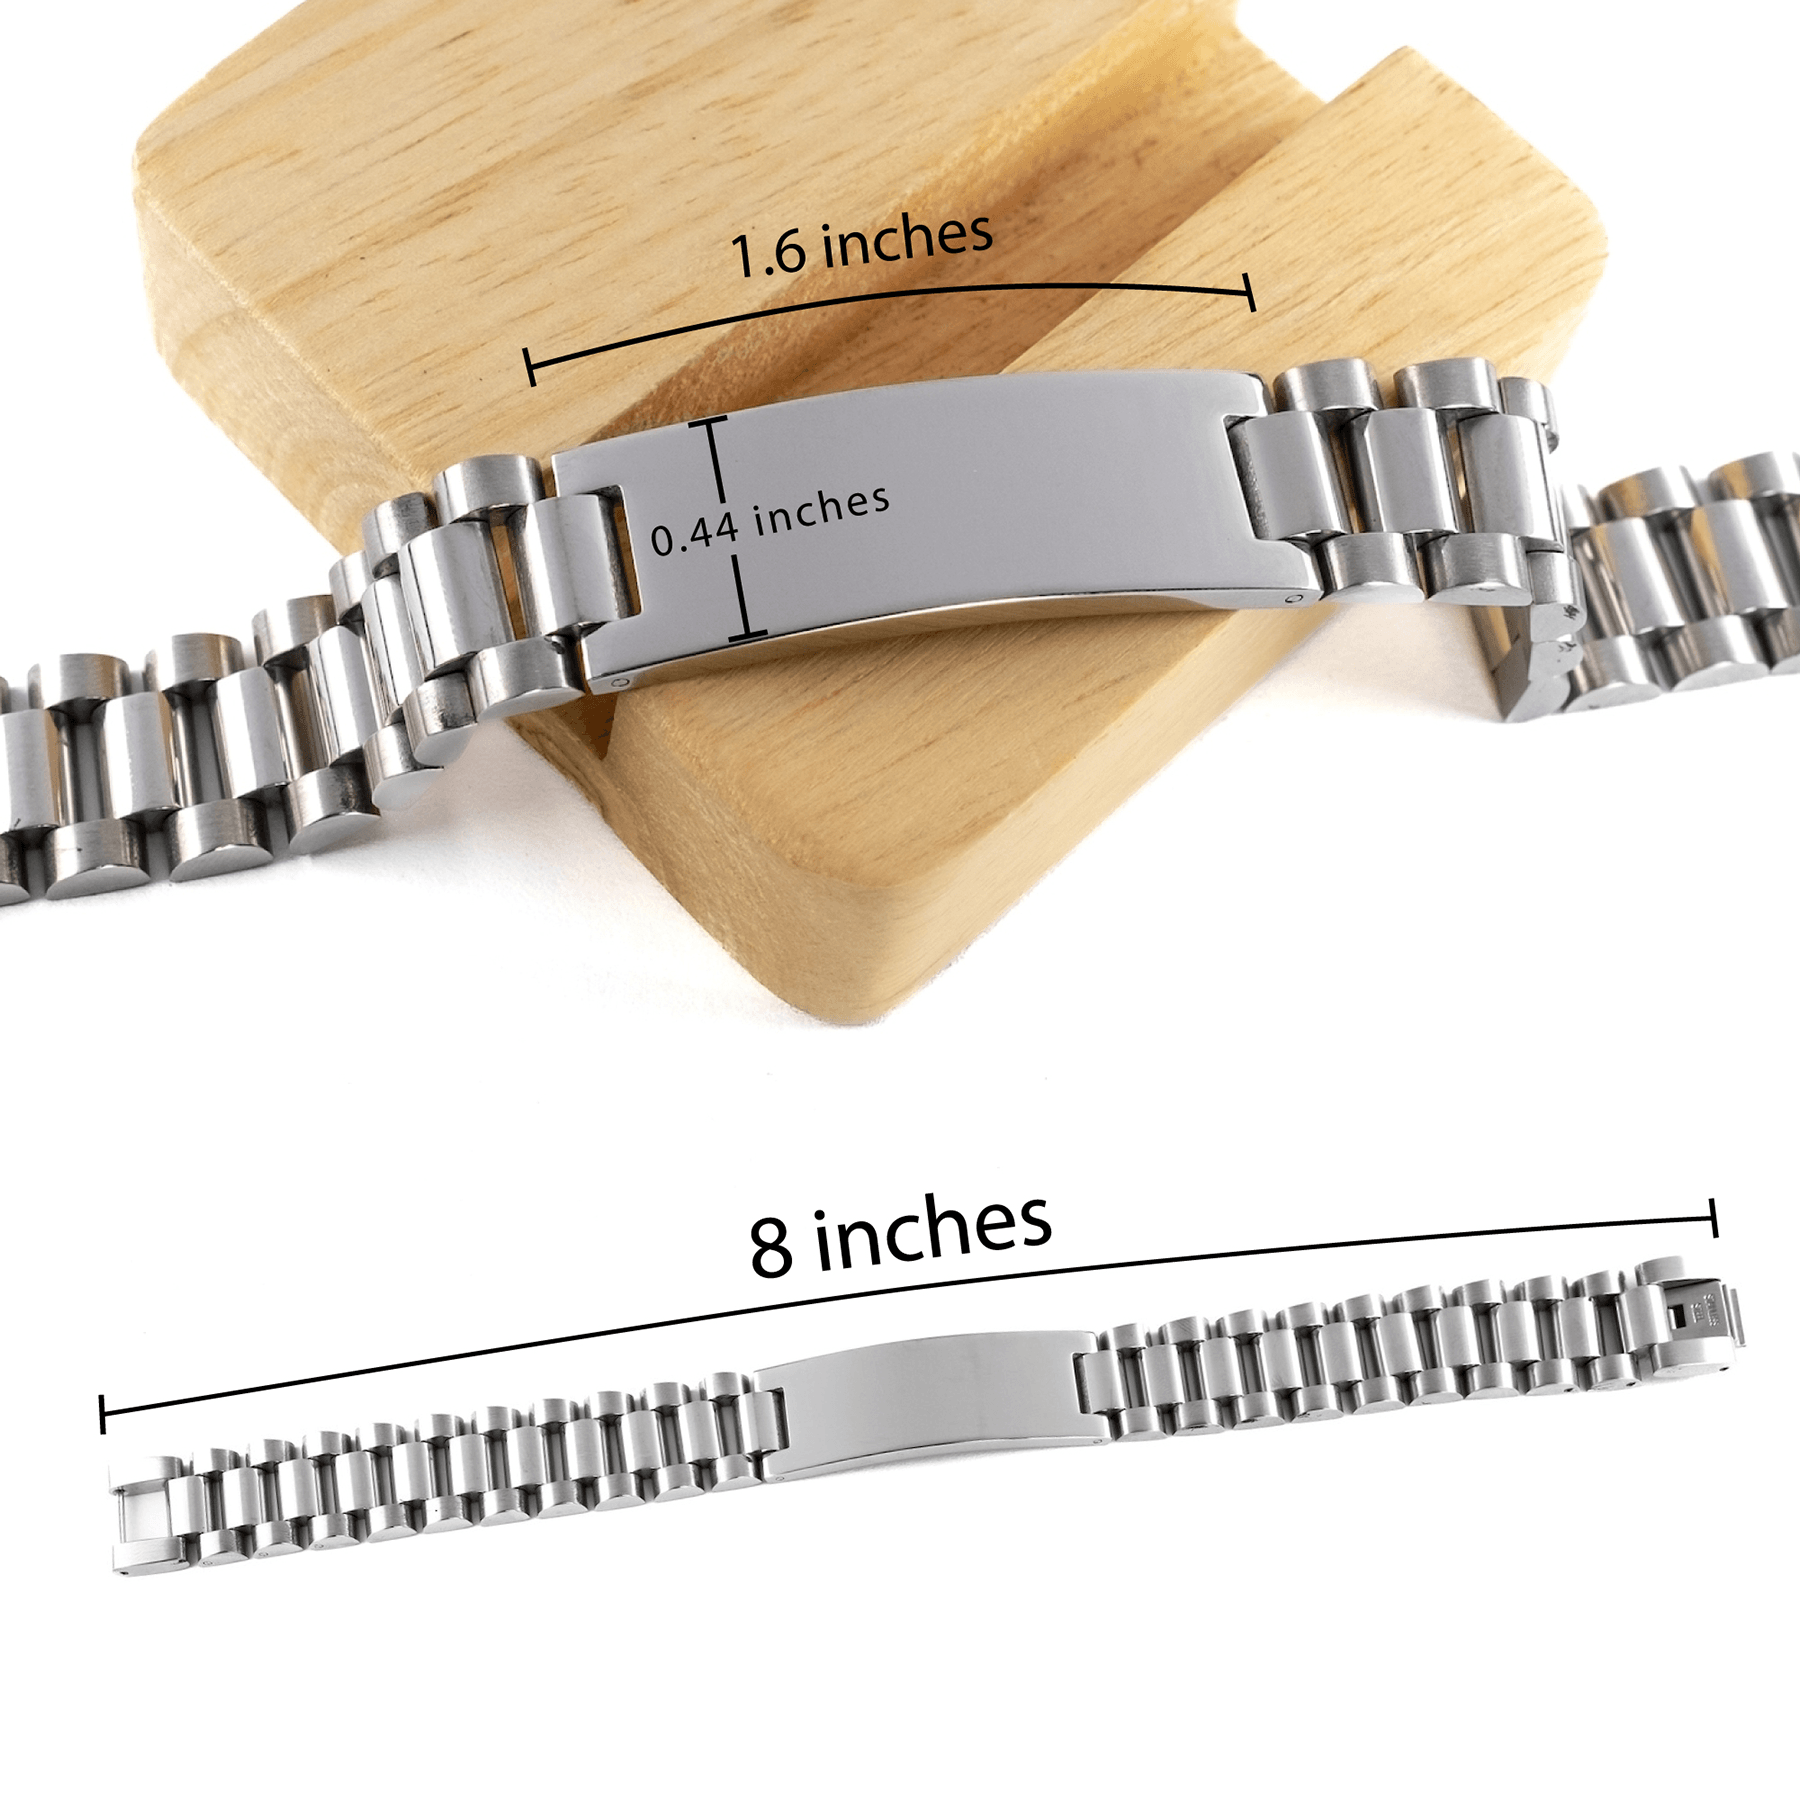 Remarkable Graphic Designer Gifts, Your dedication and hard work, Inspirational Birthday Christmas Unique Ladder Stainless Steel Bracelet For Graphic Designer, Coworkers, Men, Women, Friends - Mallard Moon Gift Shop